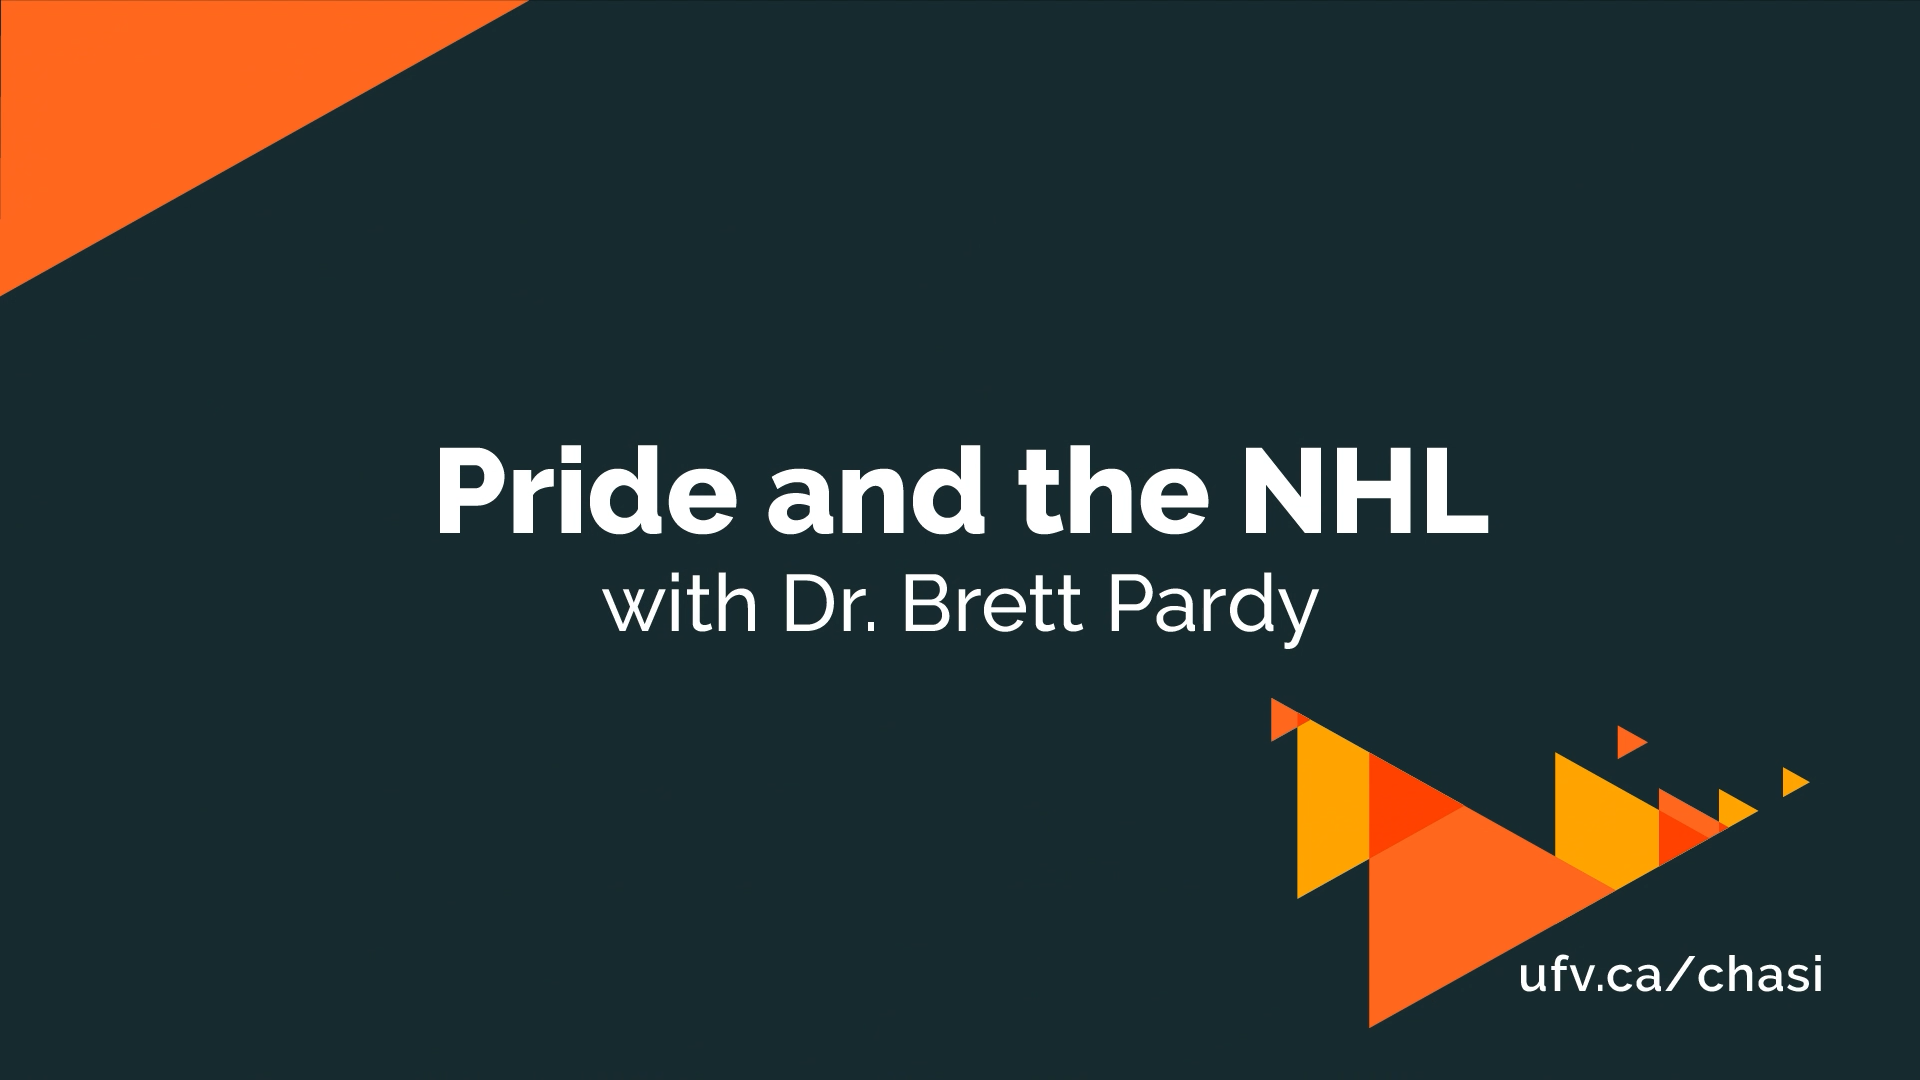 Video thumbnail reading "Pride and the NHL with Dr. Brett Pardy."